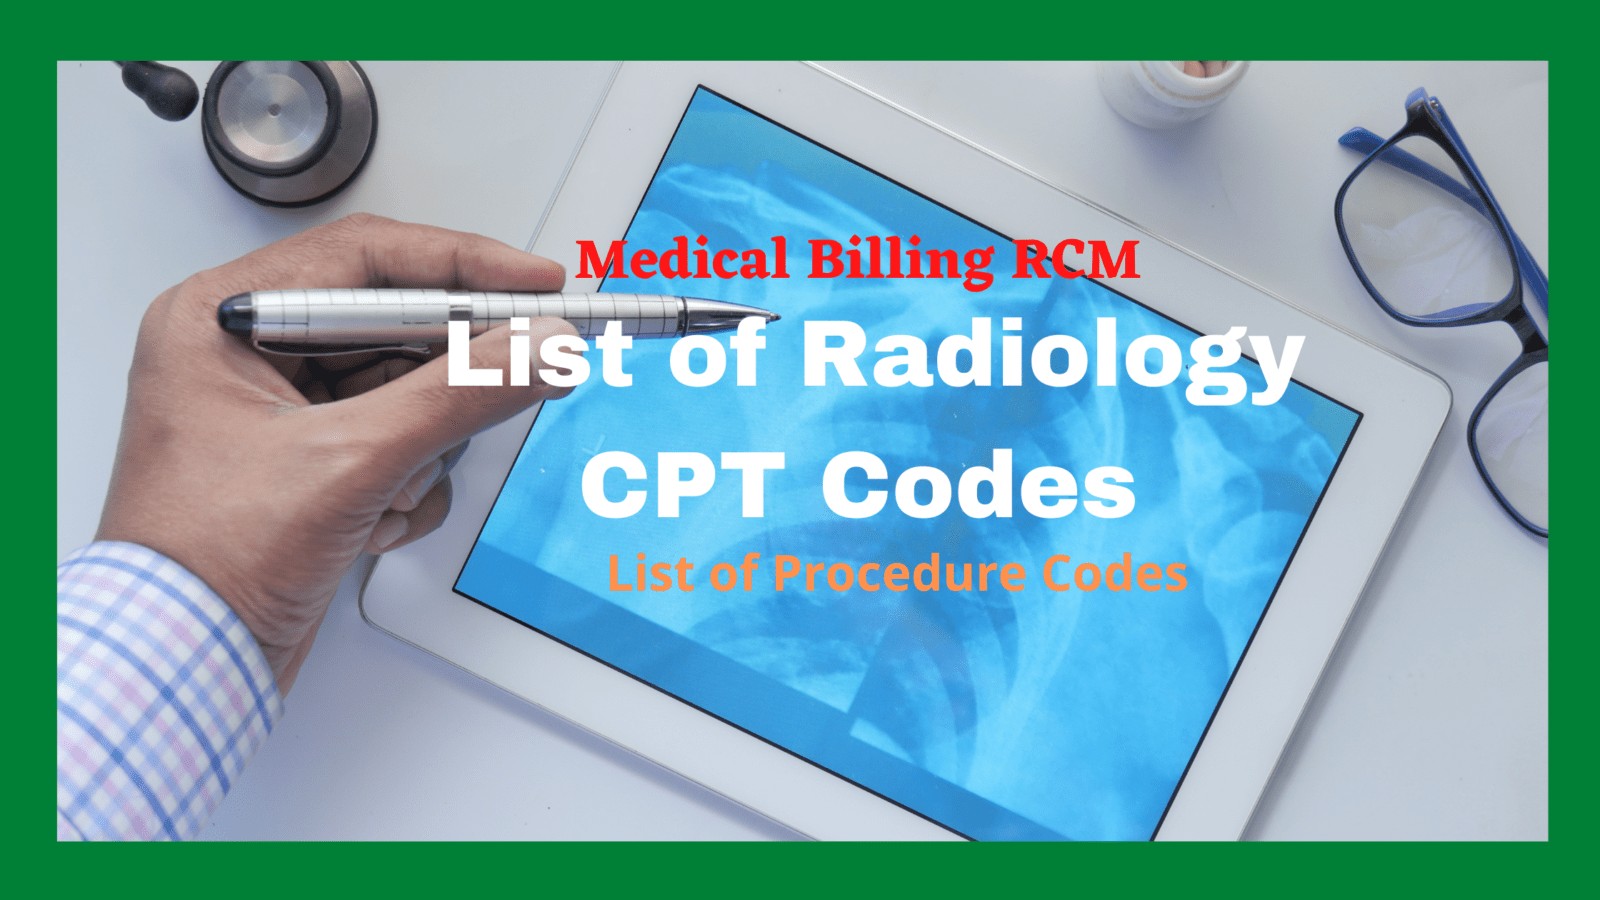 radiology cpt codes list and description